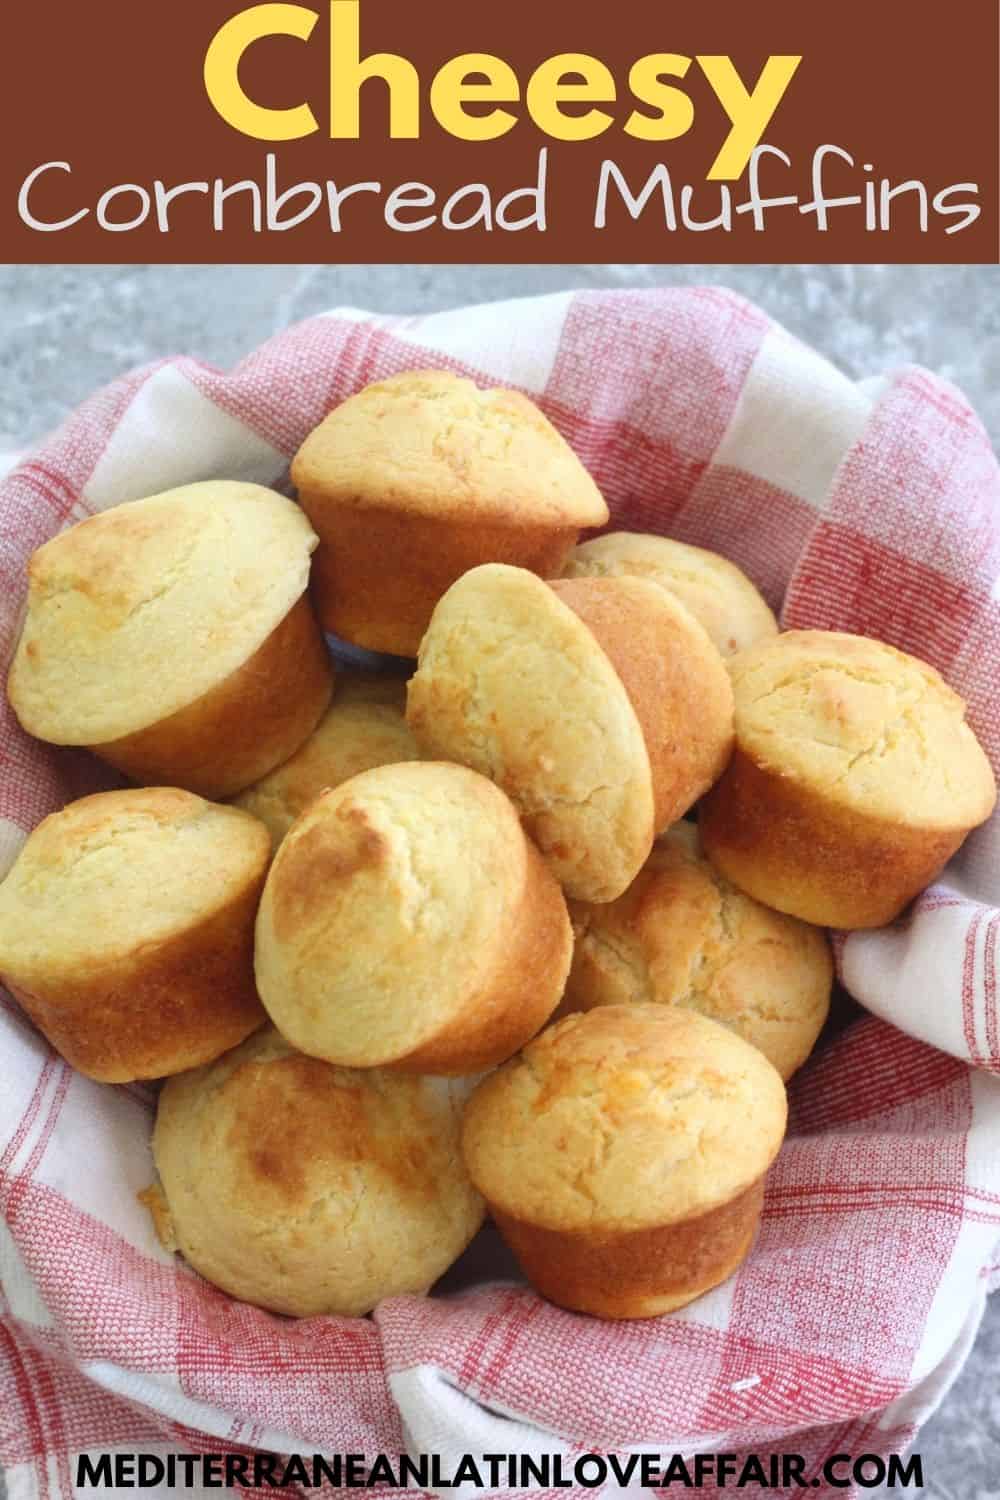 Cornbread muffins in a basket lined up with a kitchen towel. Image is prepared for Pinterest with a title bar over the image and the website link listed below. 